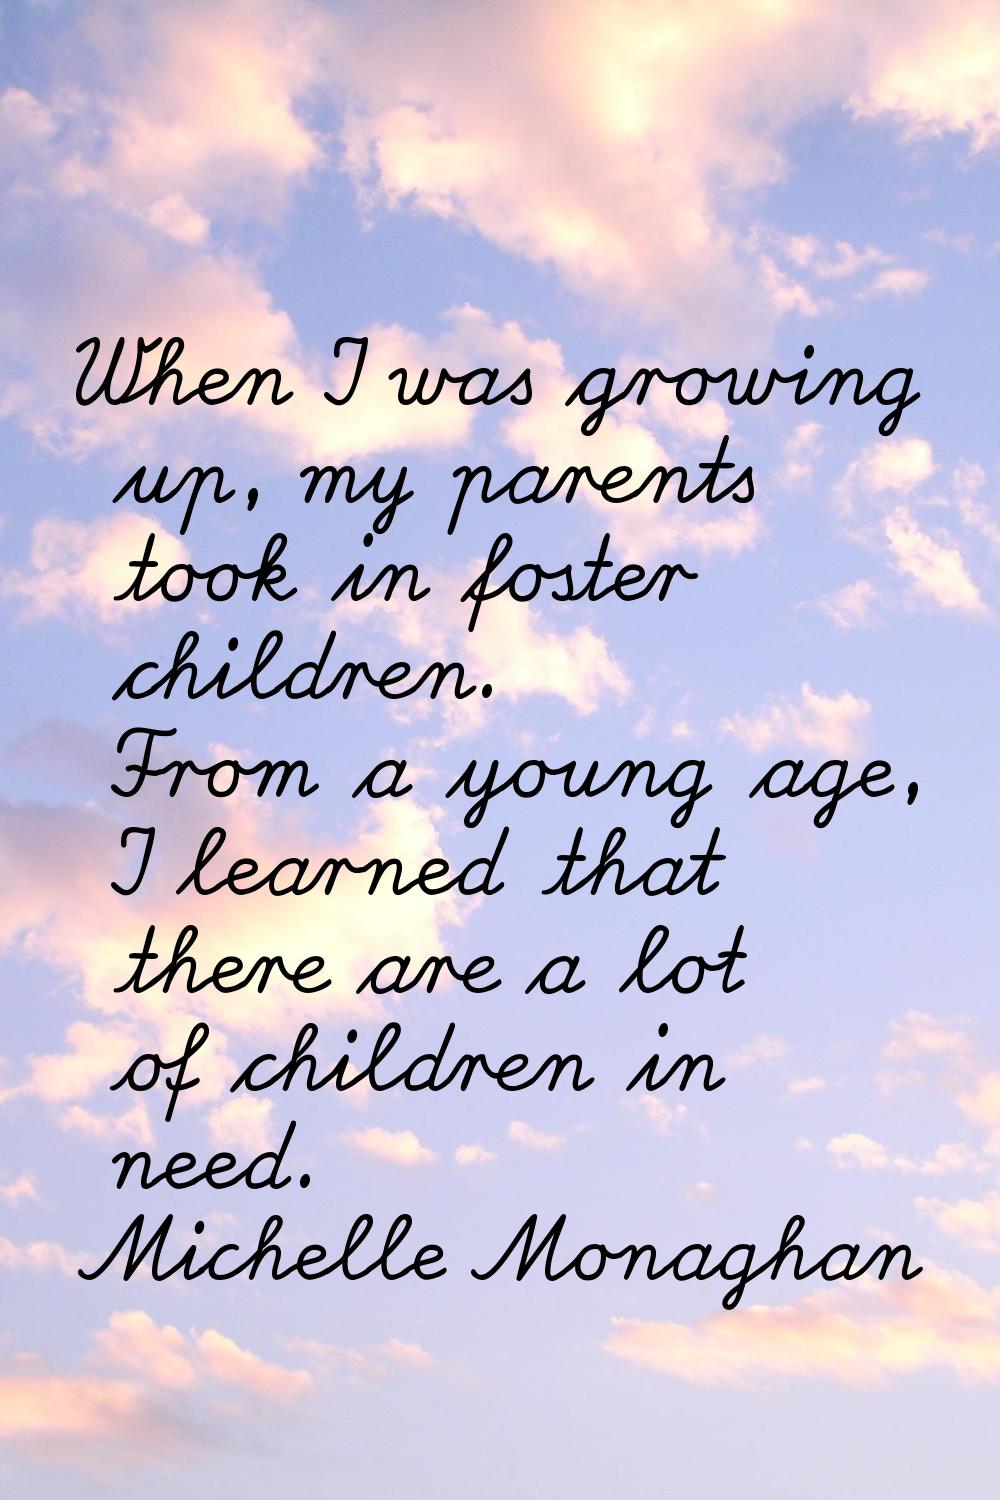 When I was growing up, my parents took in foster children. From a young age, I learned that there a